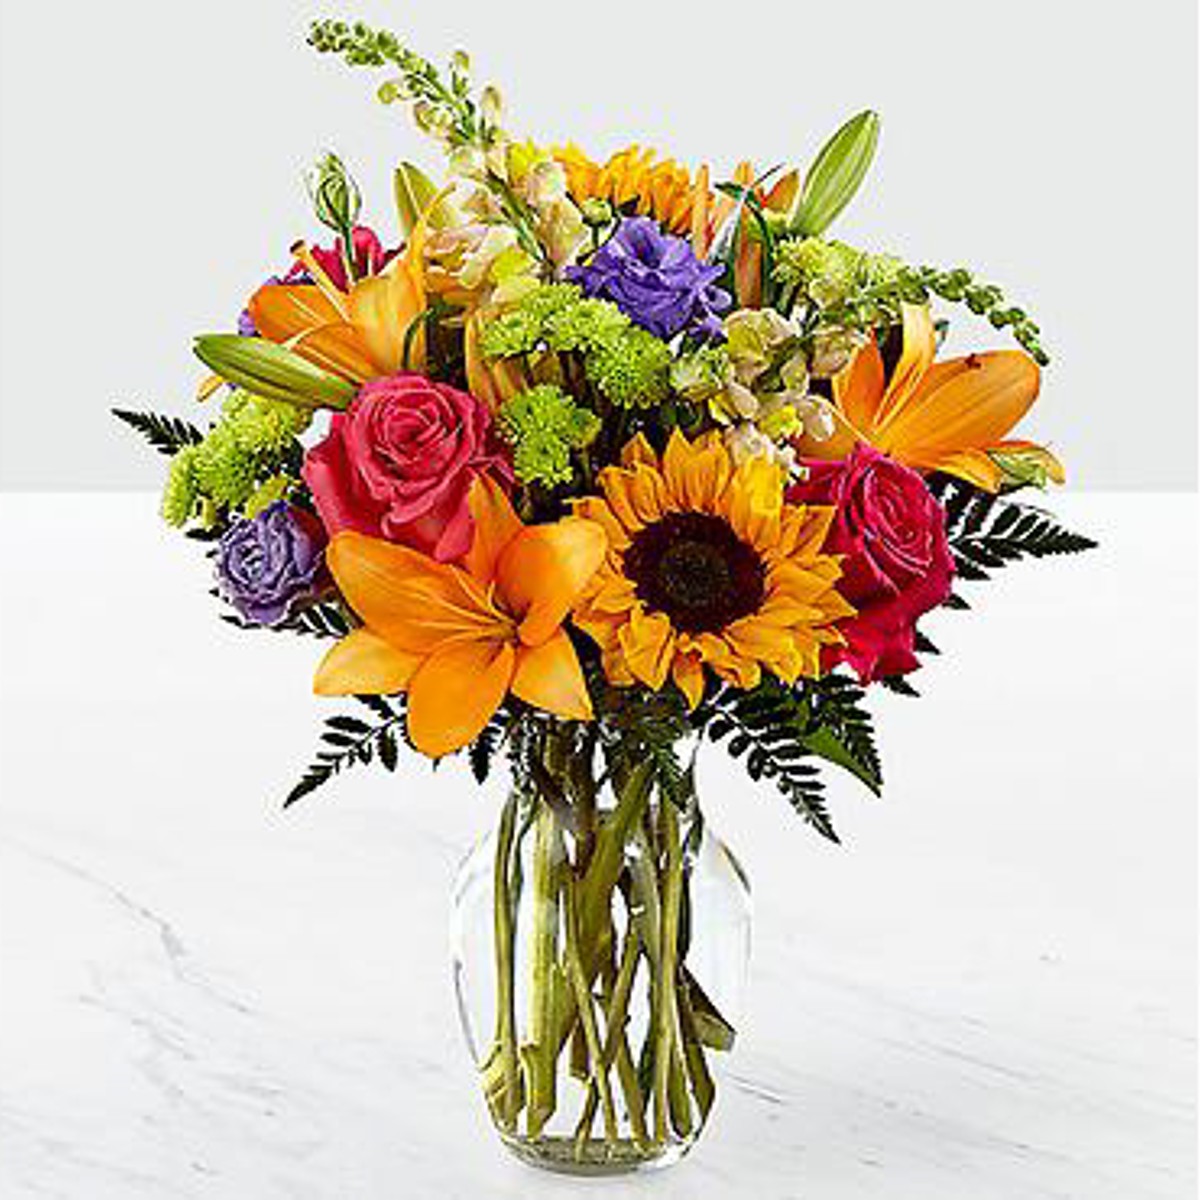 Summer wild flower bouquet including hydrangea, lilies, stock queen anne's  lace, and english ivy.